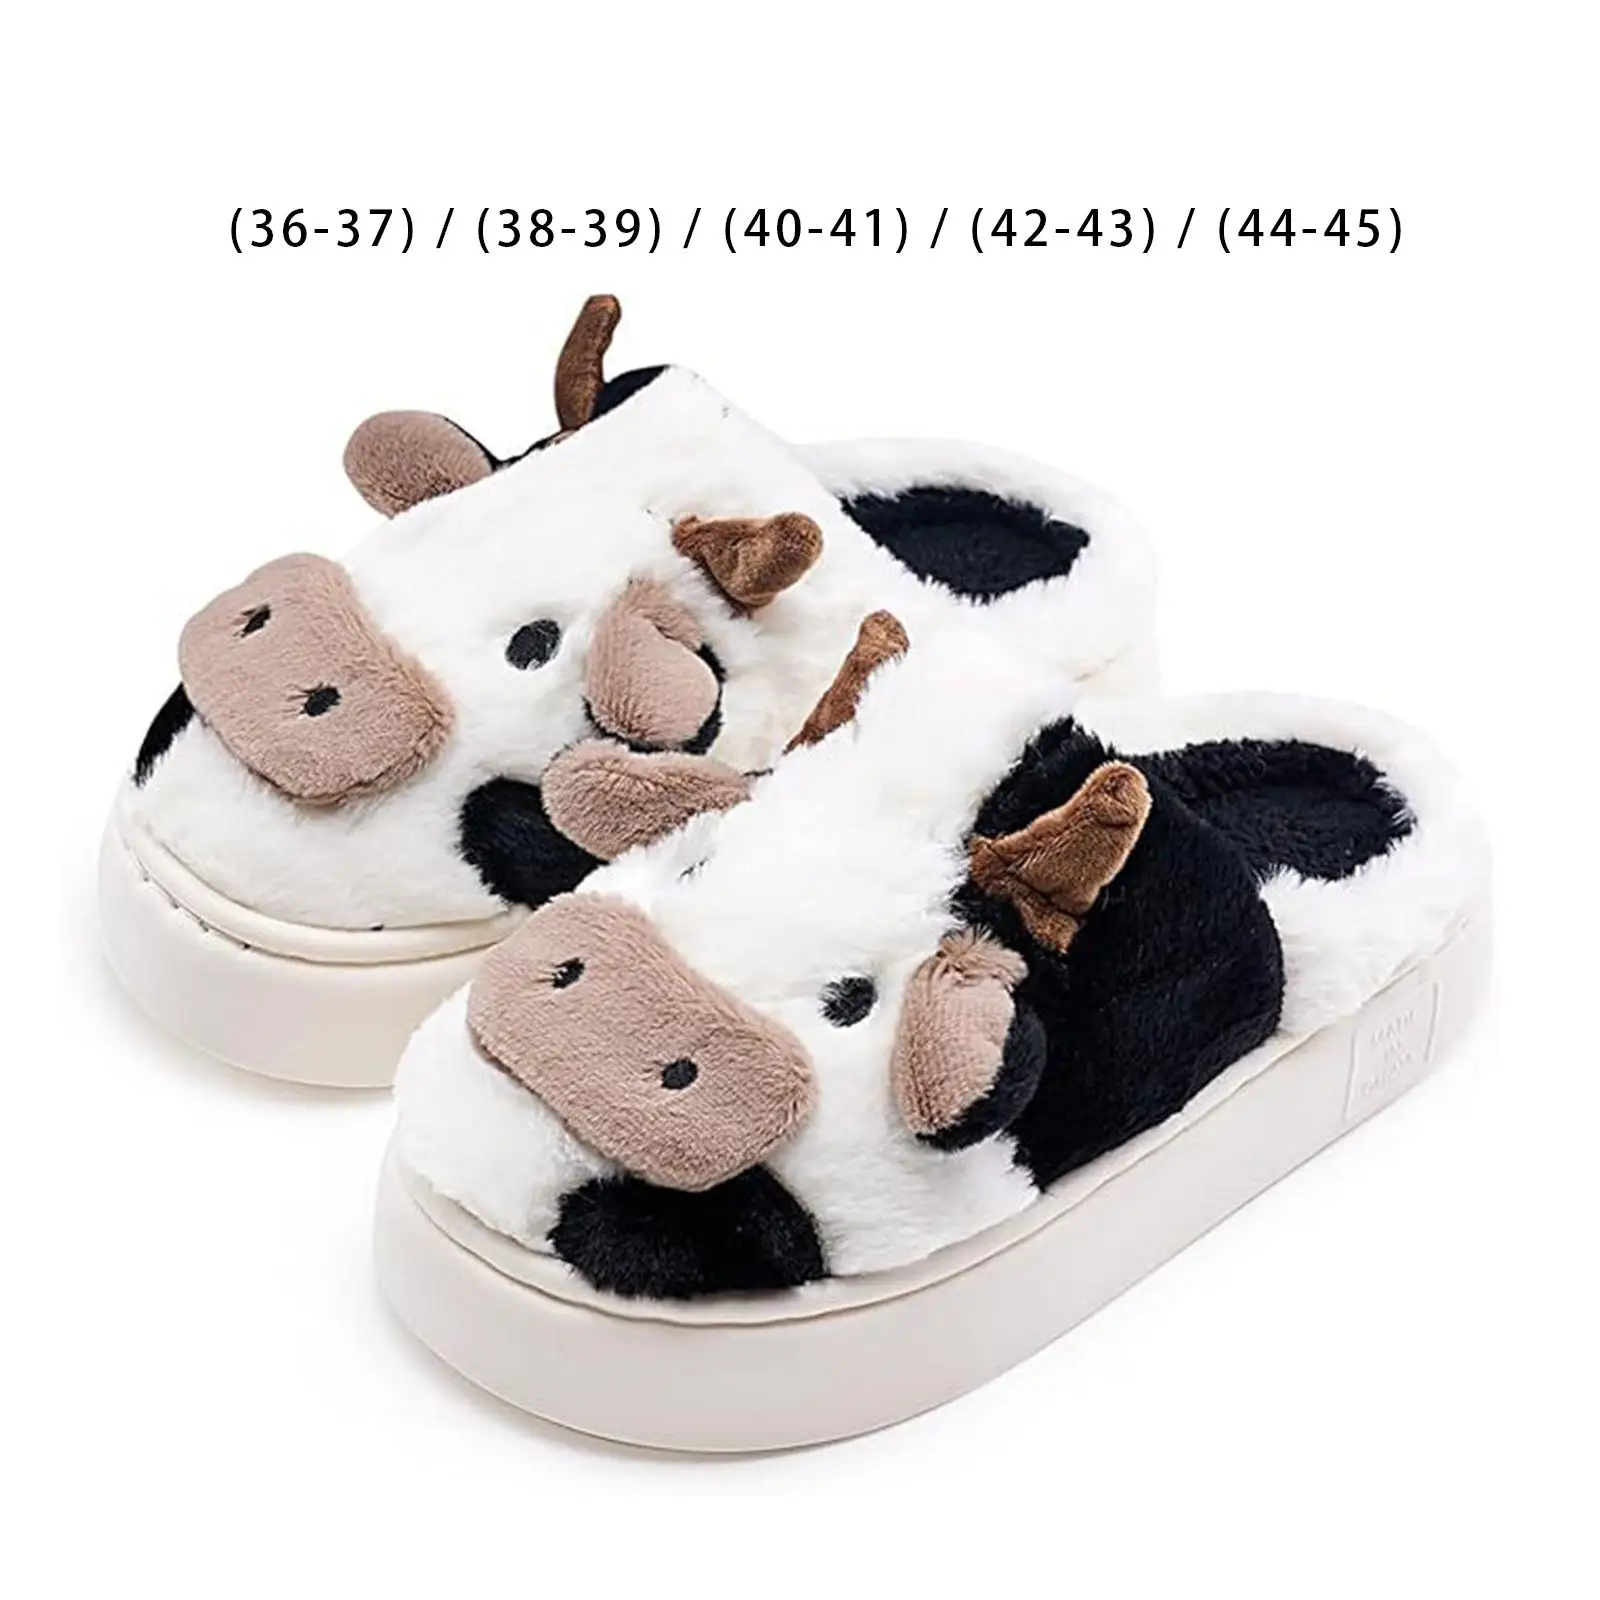 Winter Cow Plush Slippers Portable Casual Novelty Comfortable Animal Indoor Shoes for Bedroom Travel Dorm Family Members Ladies